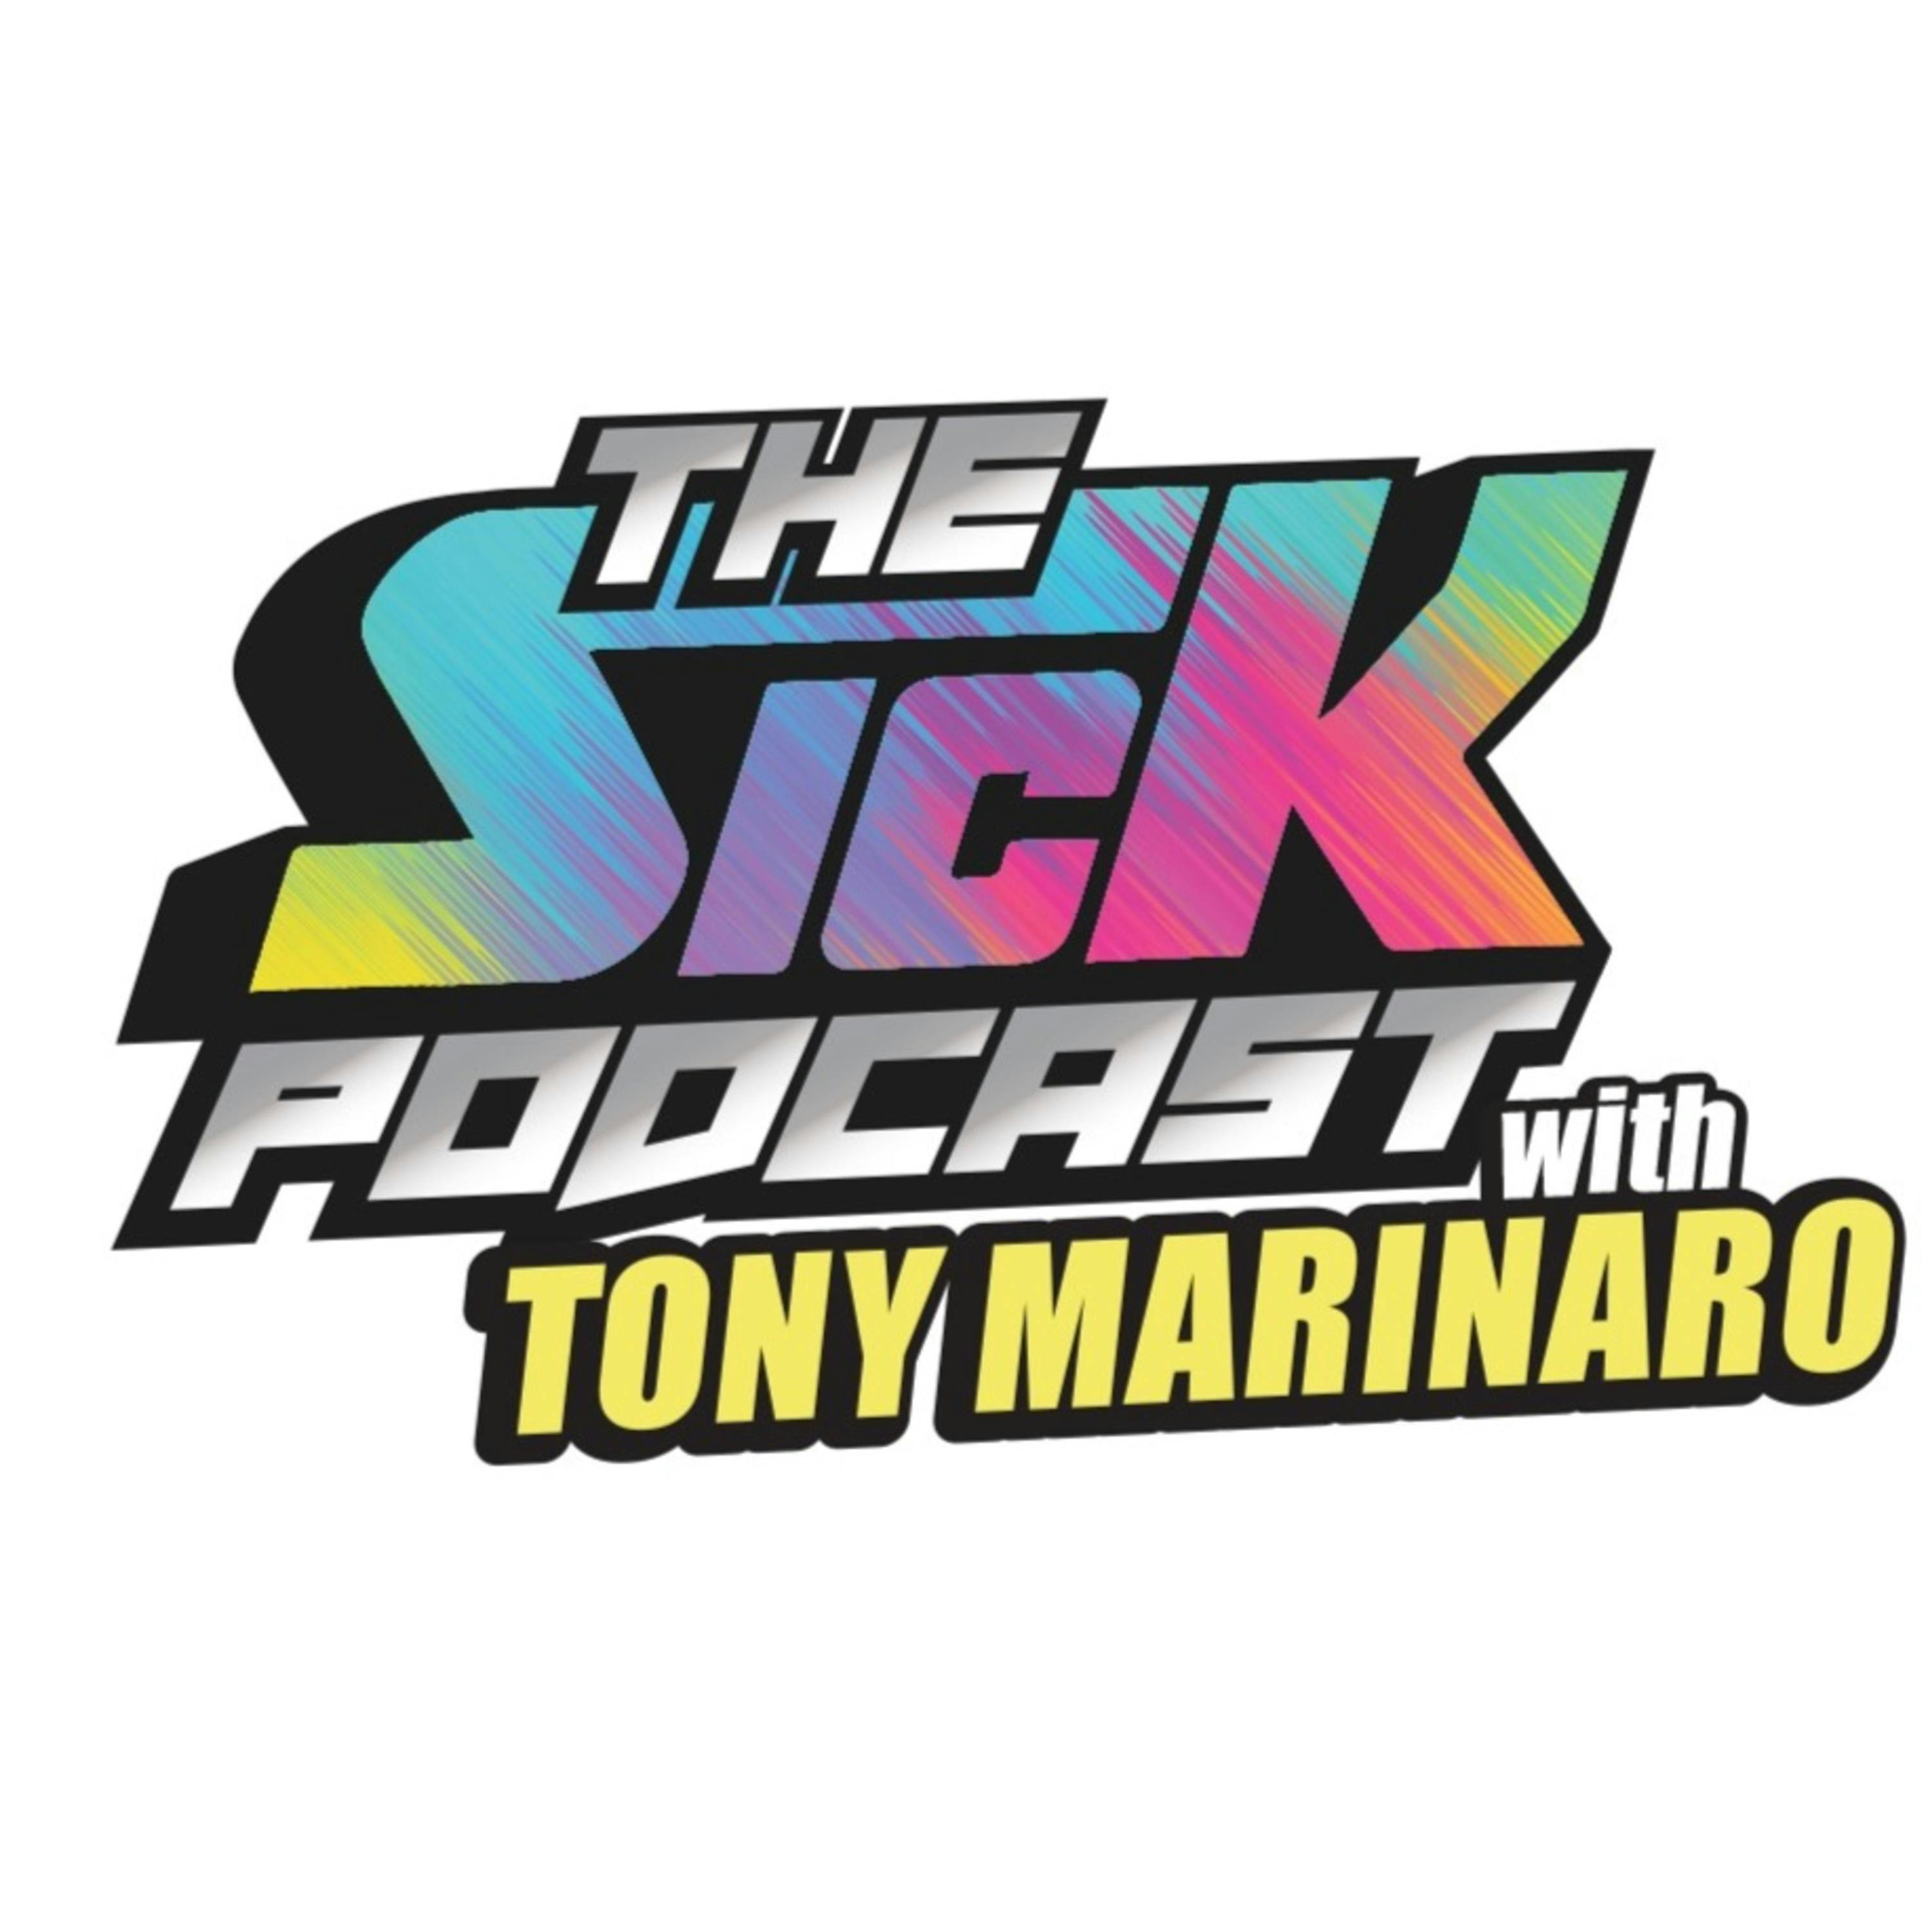 Georges Laraque: No Chance Drouin Stays! | The Sick Podcast with Tony Marinaro March 7 2023